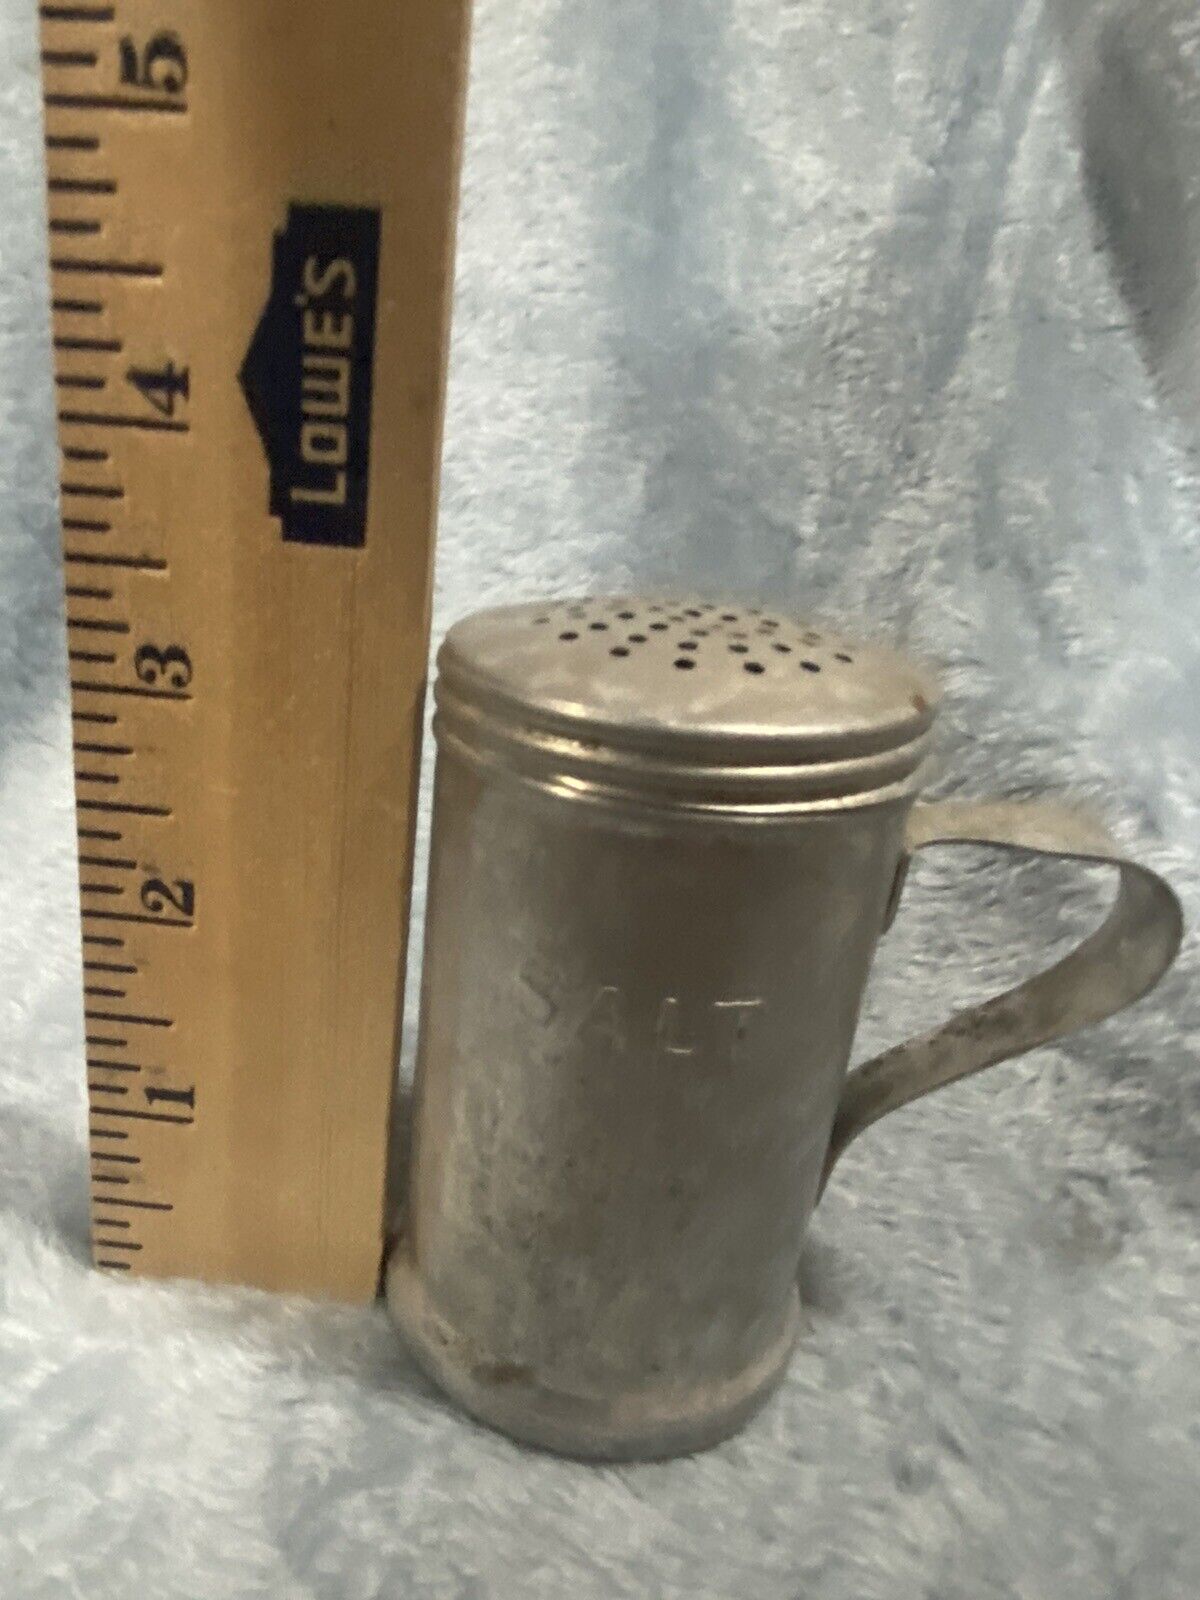 Vintage Alluminum slt shaker with handle and screw on lid